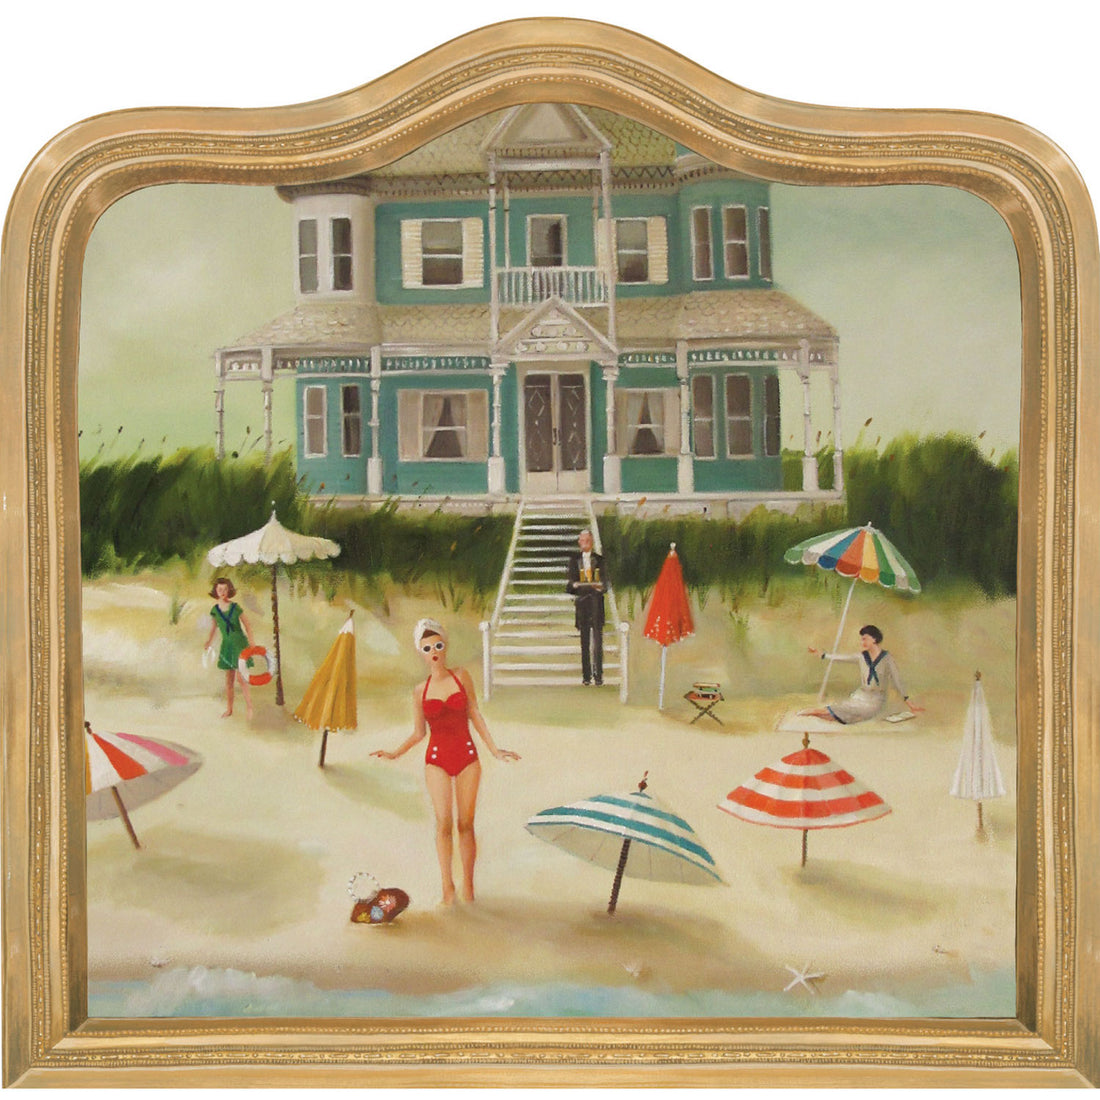 A painterly illustration of a vintage beach scene featuring a beach house, umbrellas in the sand, women in bathing suits, and a butler with a tray of refreshments, contained in a square brass frame with a curved top edge.